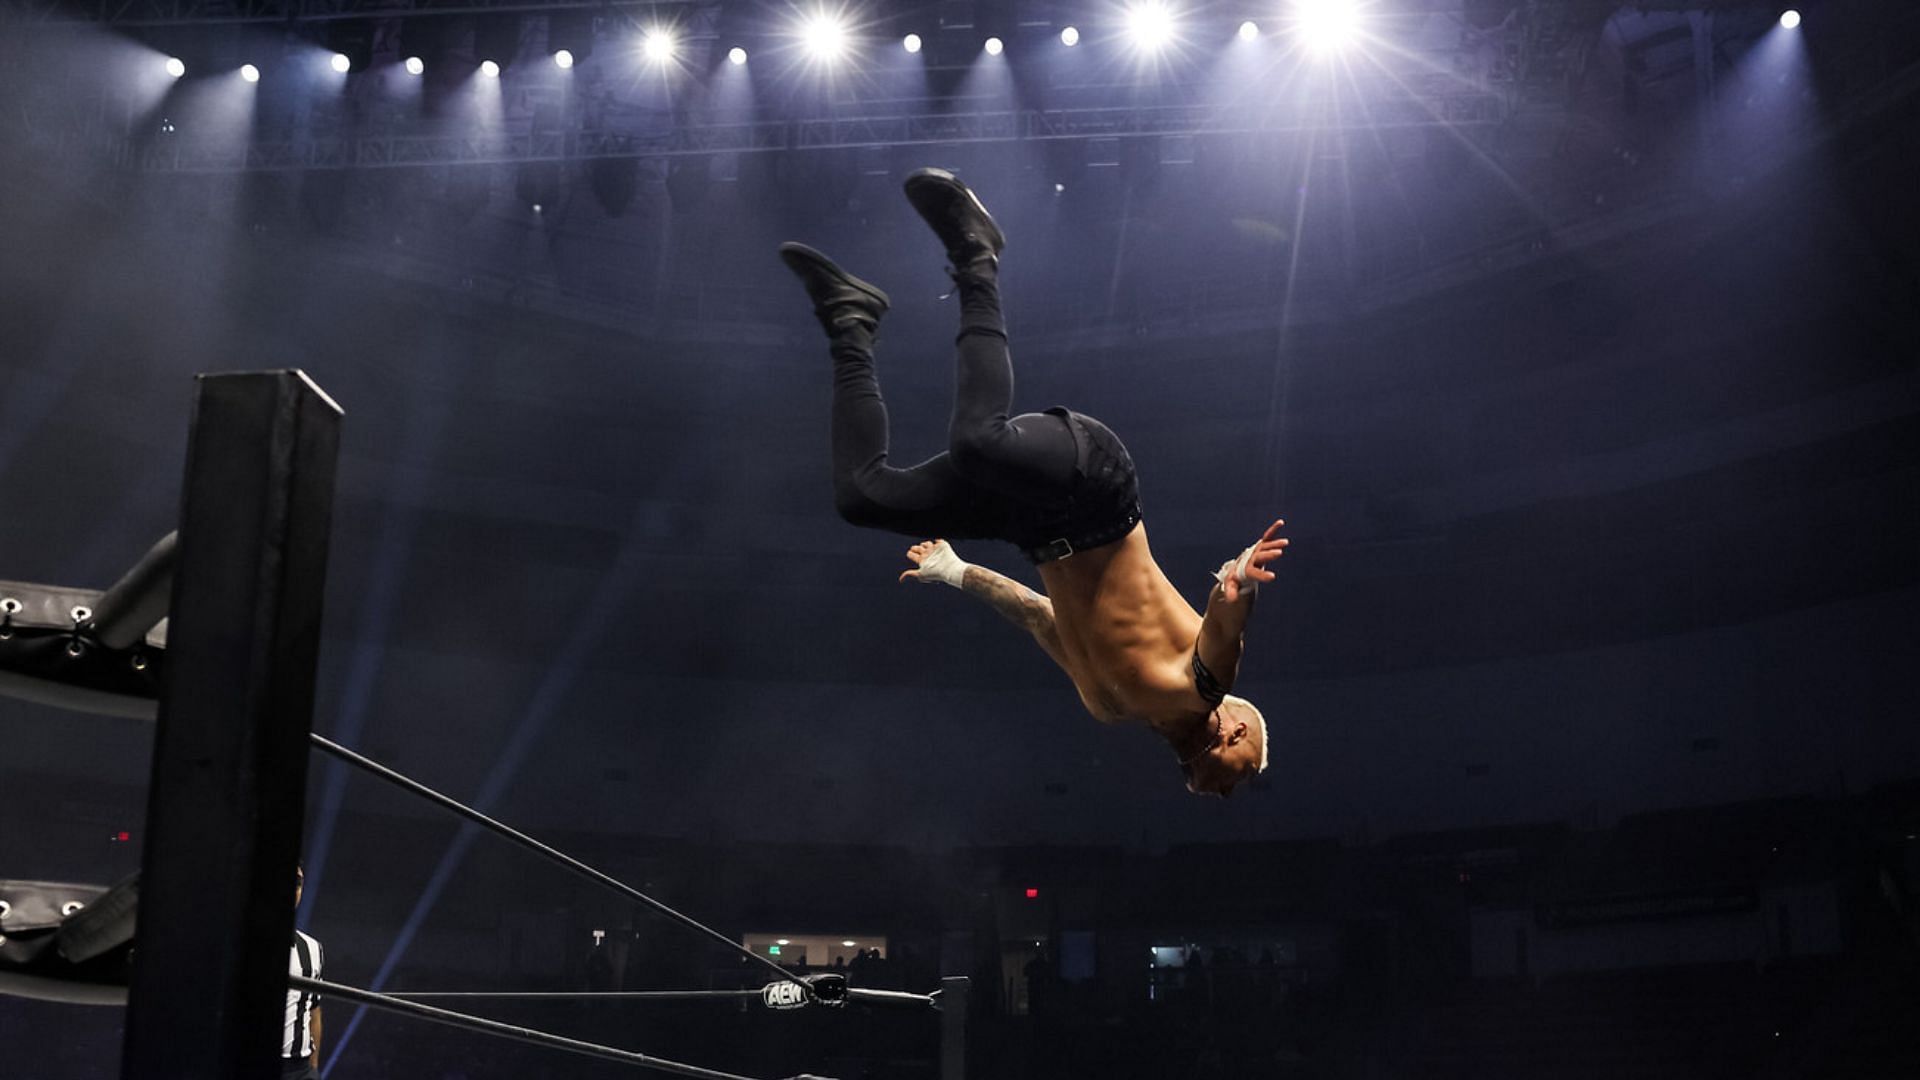 Darby Allin has been known to always perform hardcore spots [Photo courtesy of AEW